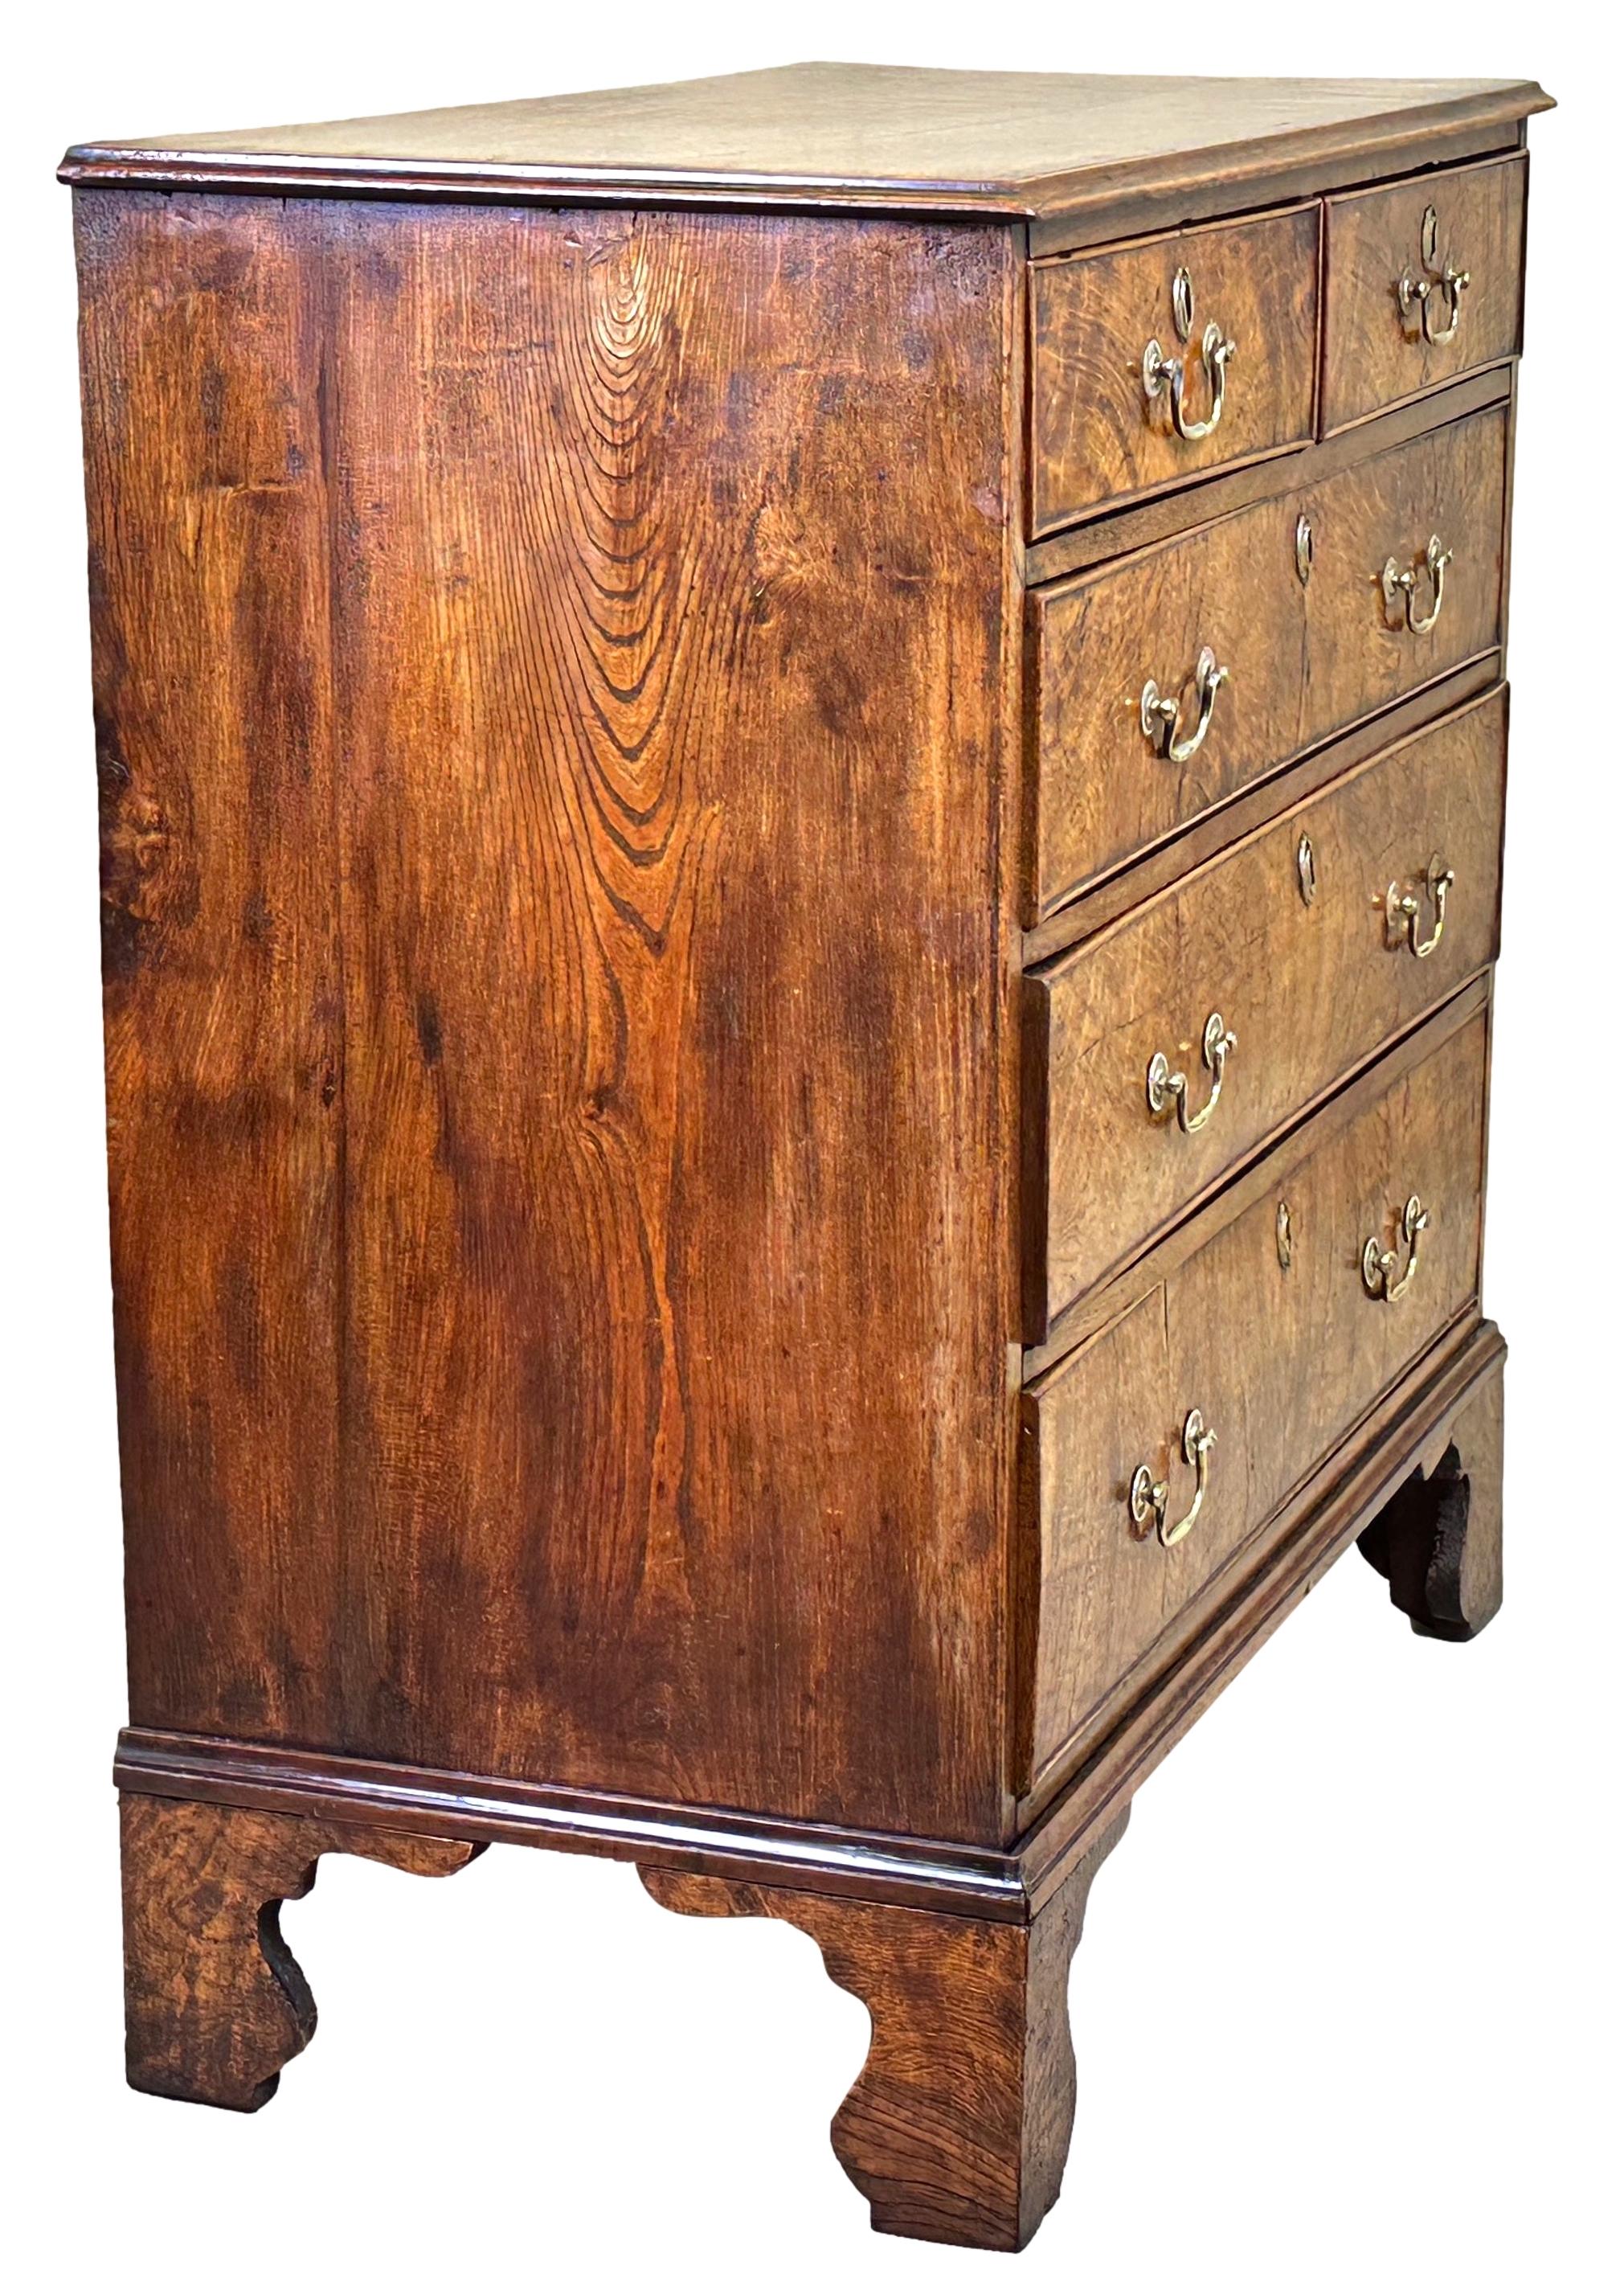 A Delightful Mid 18th Century, George II Period, Elm Chest Having Superbly Figured Top With Attractive Crossbanded Decoration, Over Two Short And Three Long Drawers Retaining Original Brass Swan Neck Handles, Raised On Attractive Original Shaped